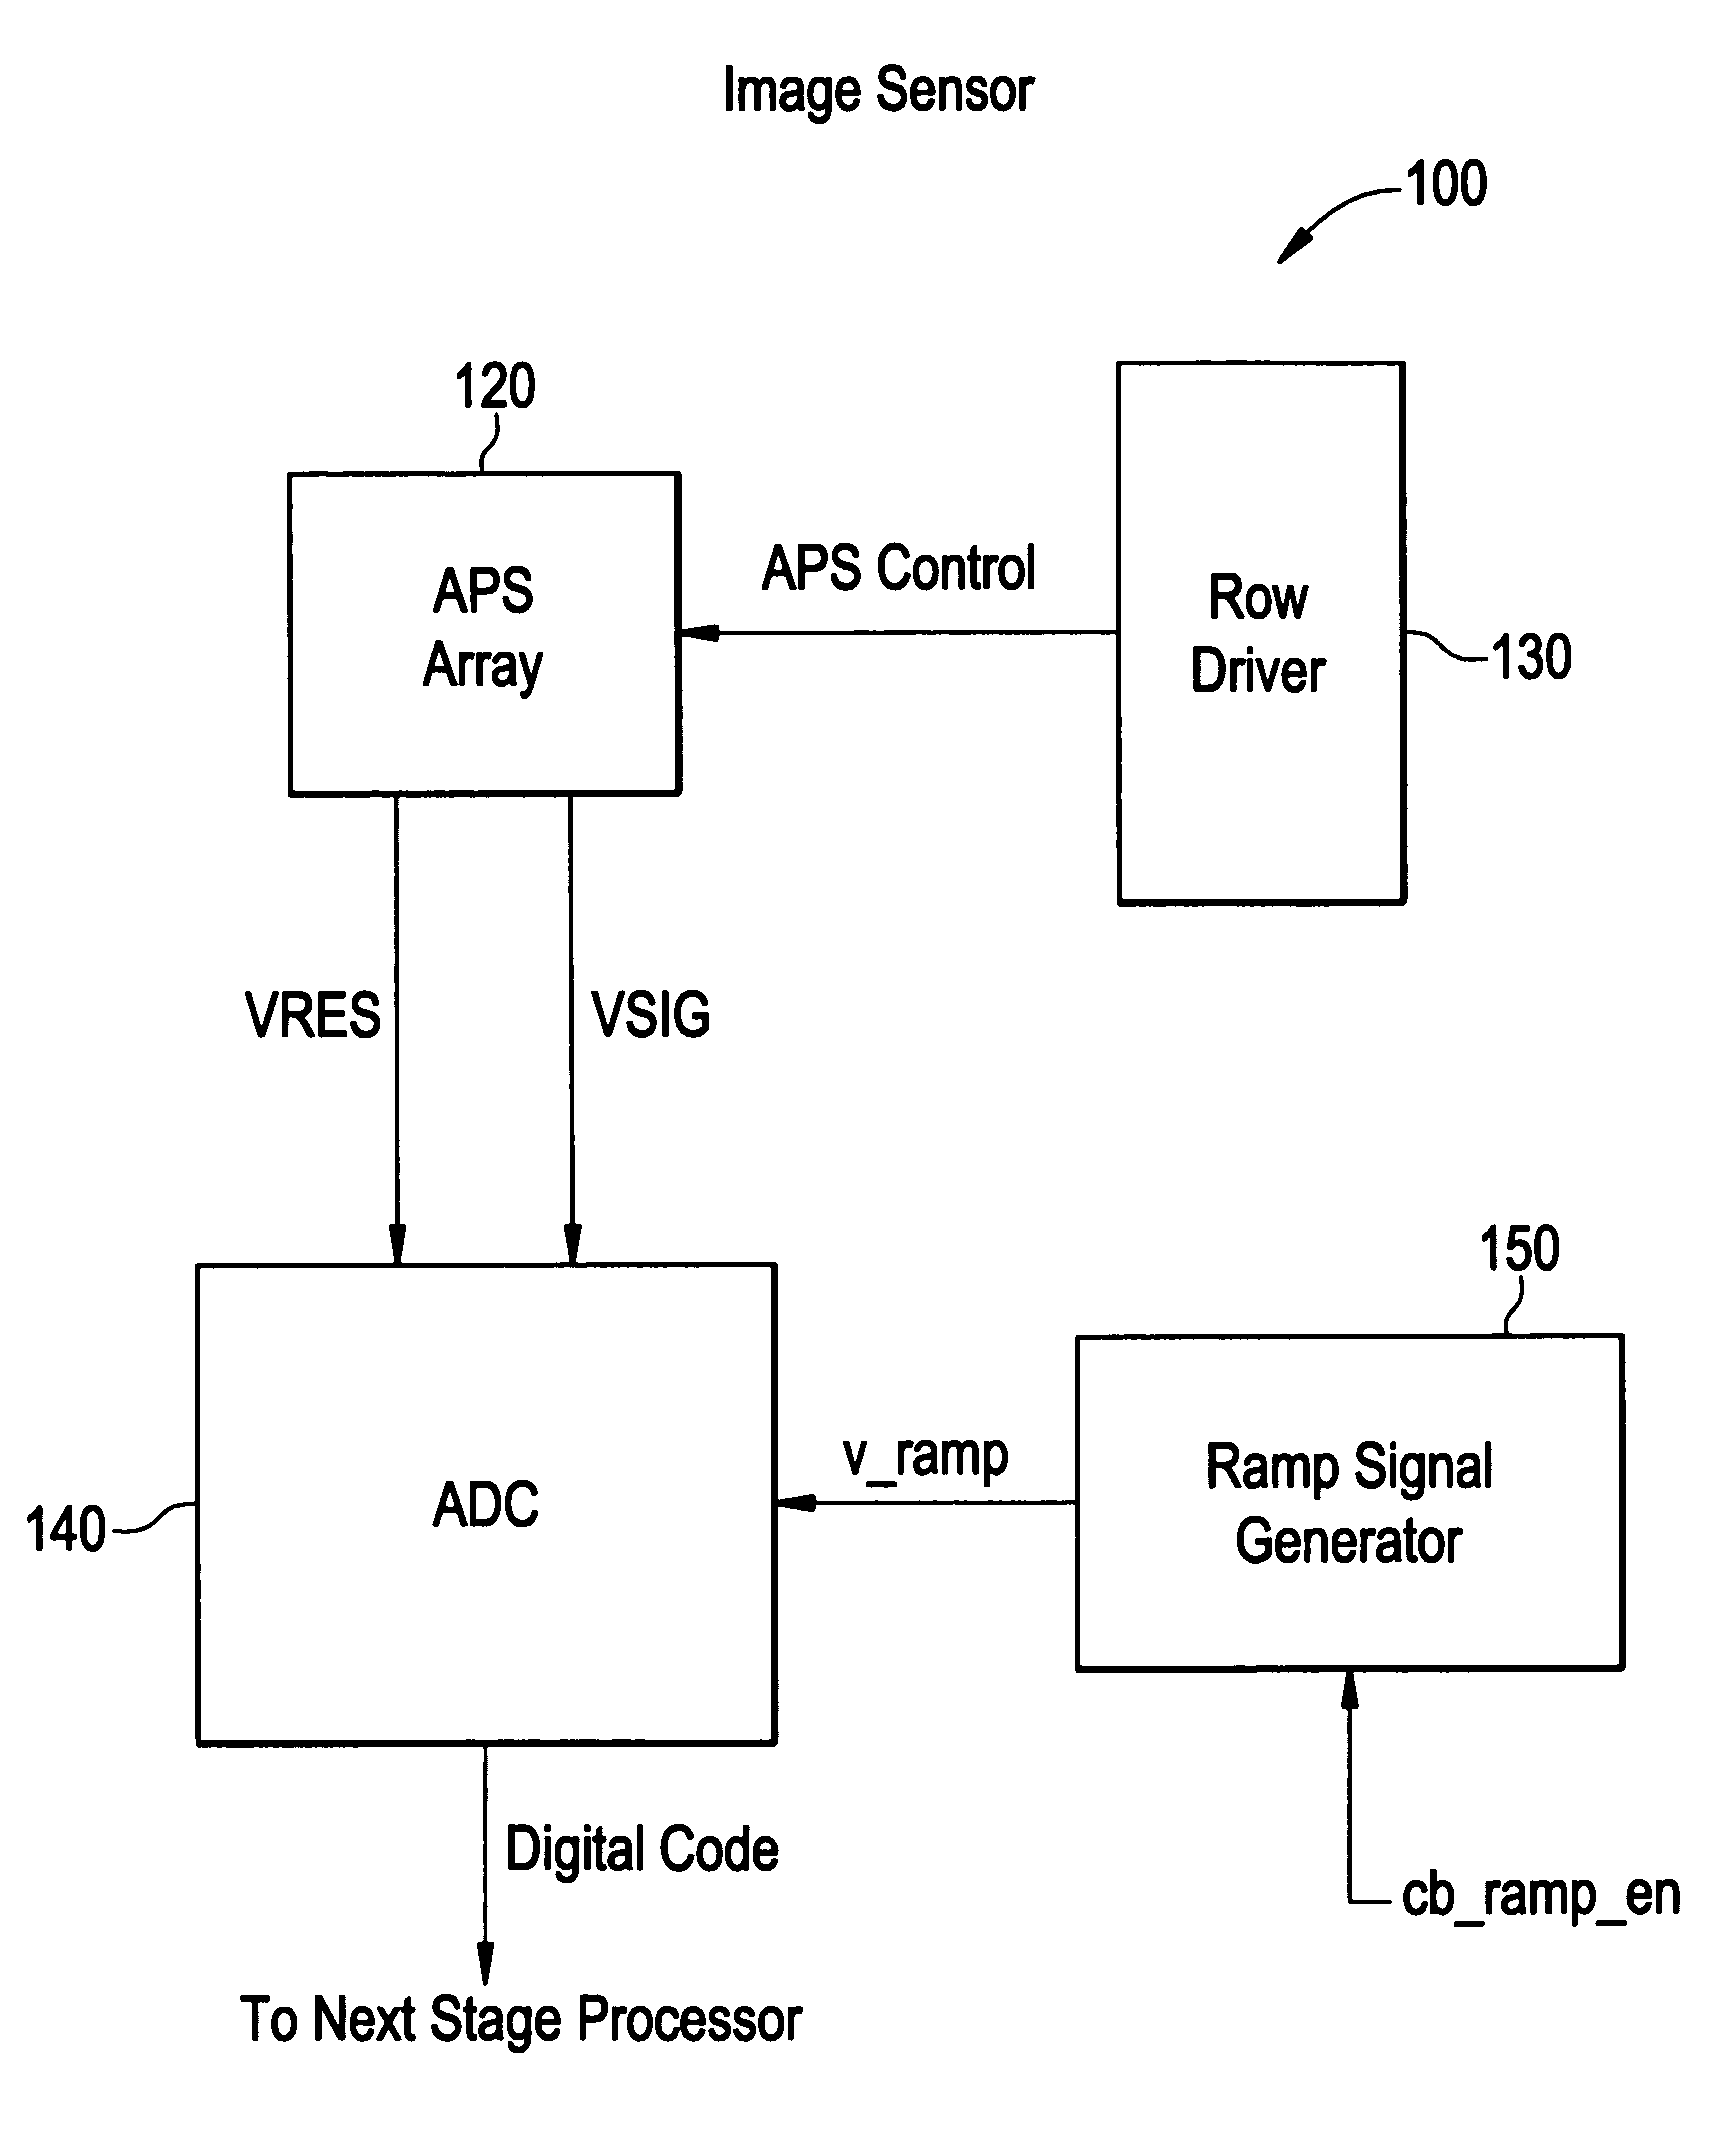 Image sensor having a ramp generator and method for calibrating a ramp slope value of a ramp signal